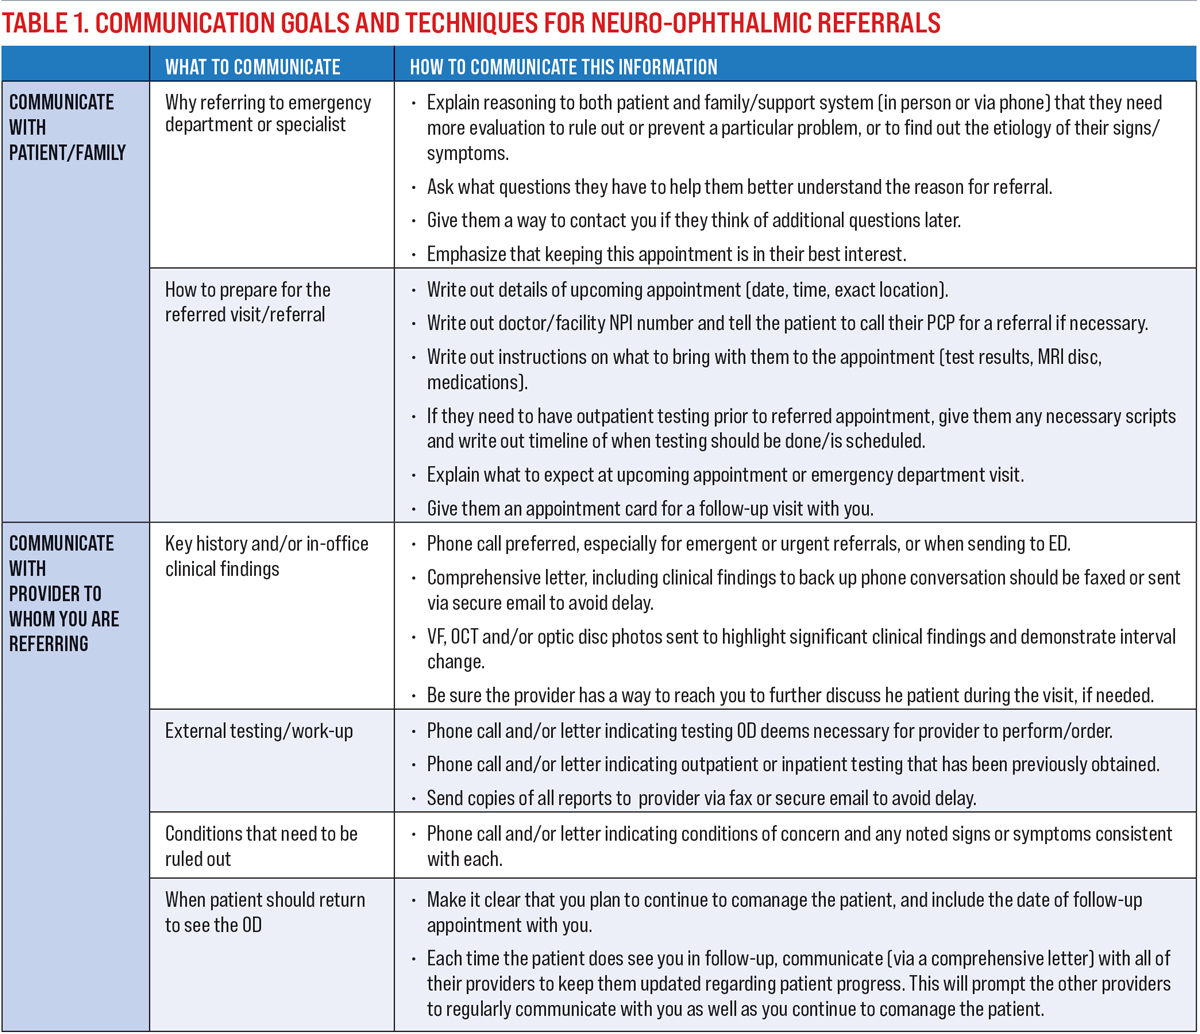 Table 1. Communication Goals and Techniques for Neuro-ophthalmic Referrals